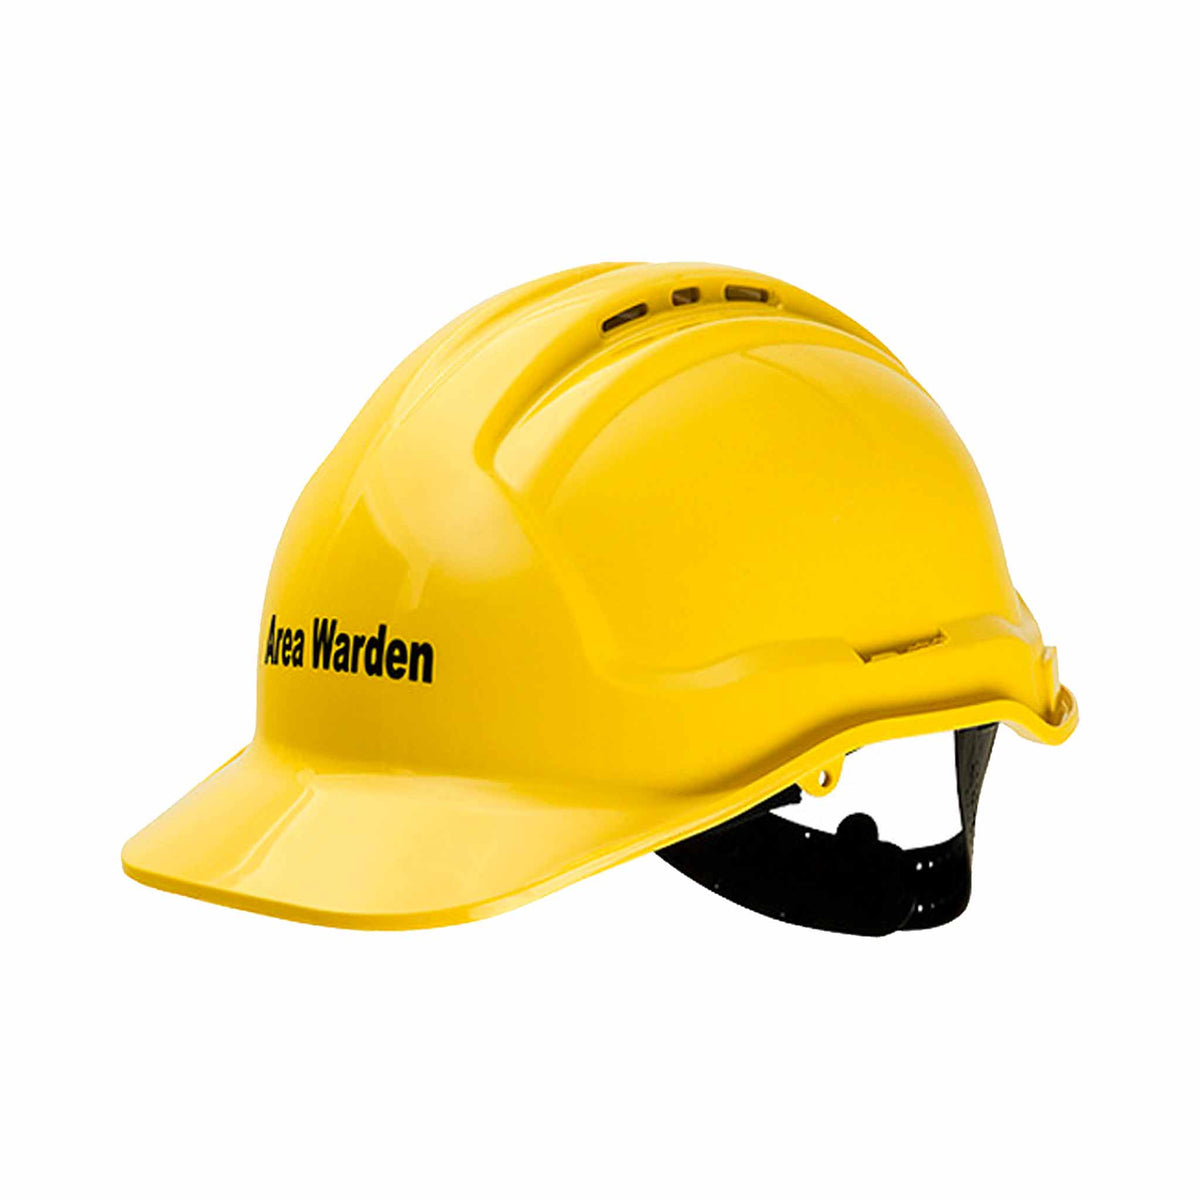 AREA WARDEN - YELLOW HARD HAT - HPFPR57AW